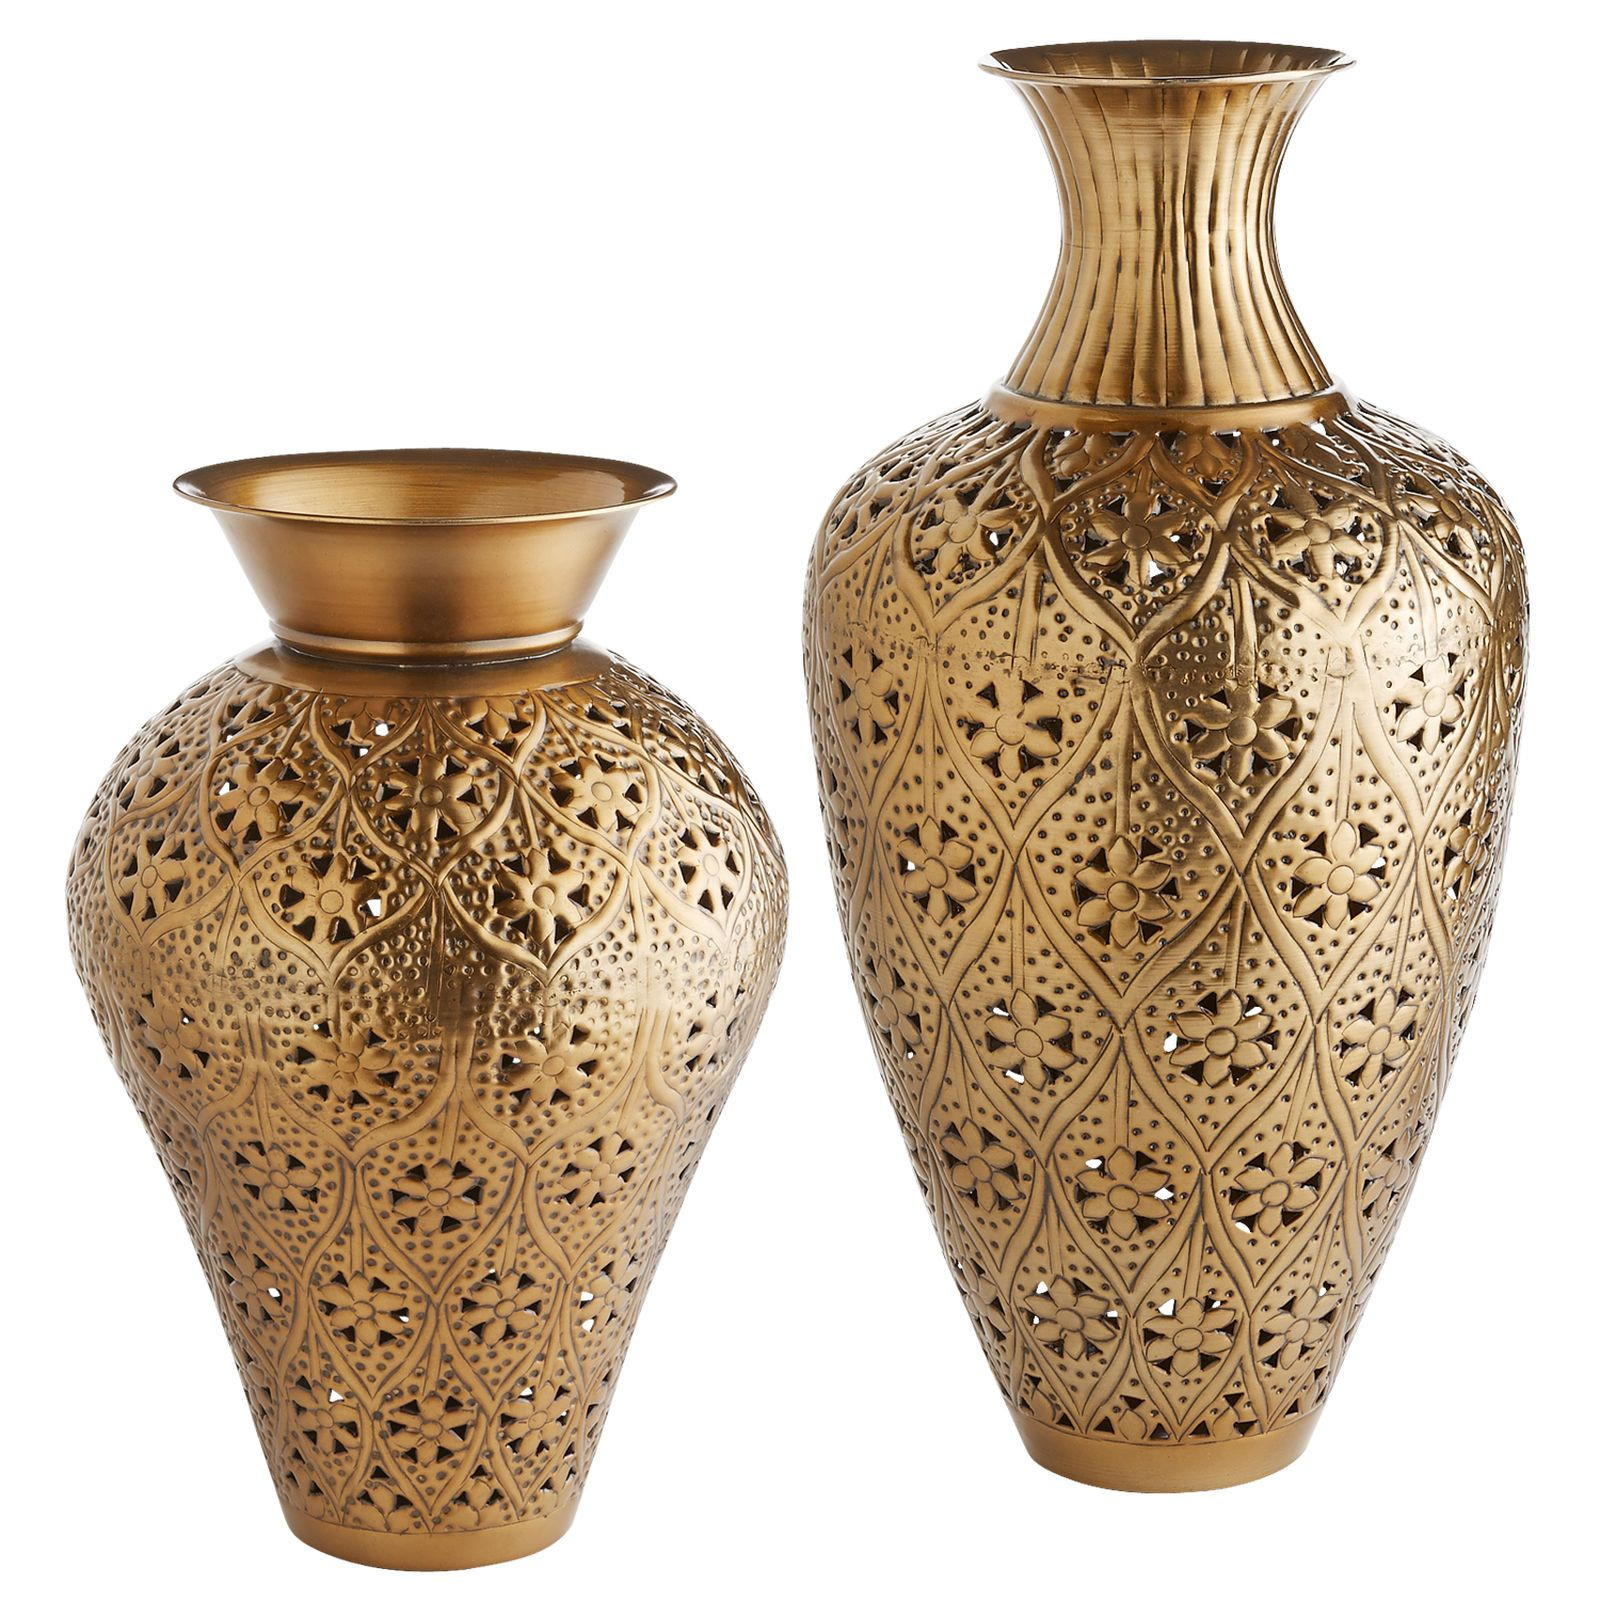 15 Recommended oriental Accent Vase 2024 free download oriental accent vase of found the perfect additions to your diverse collection our regarding found the perfect additions to your diverse collection our unconventional vases evoke that bohemi